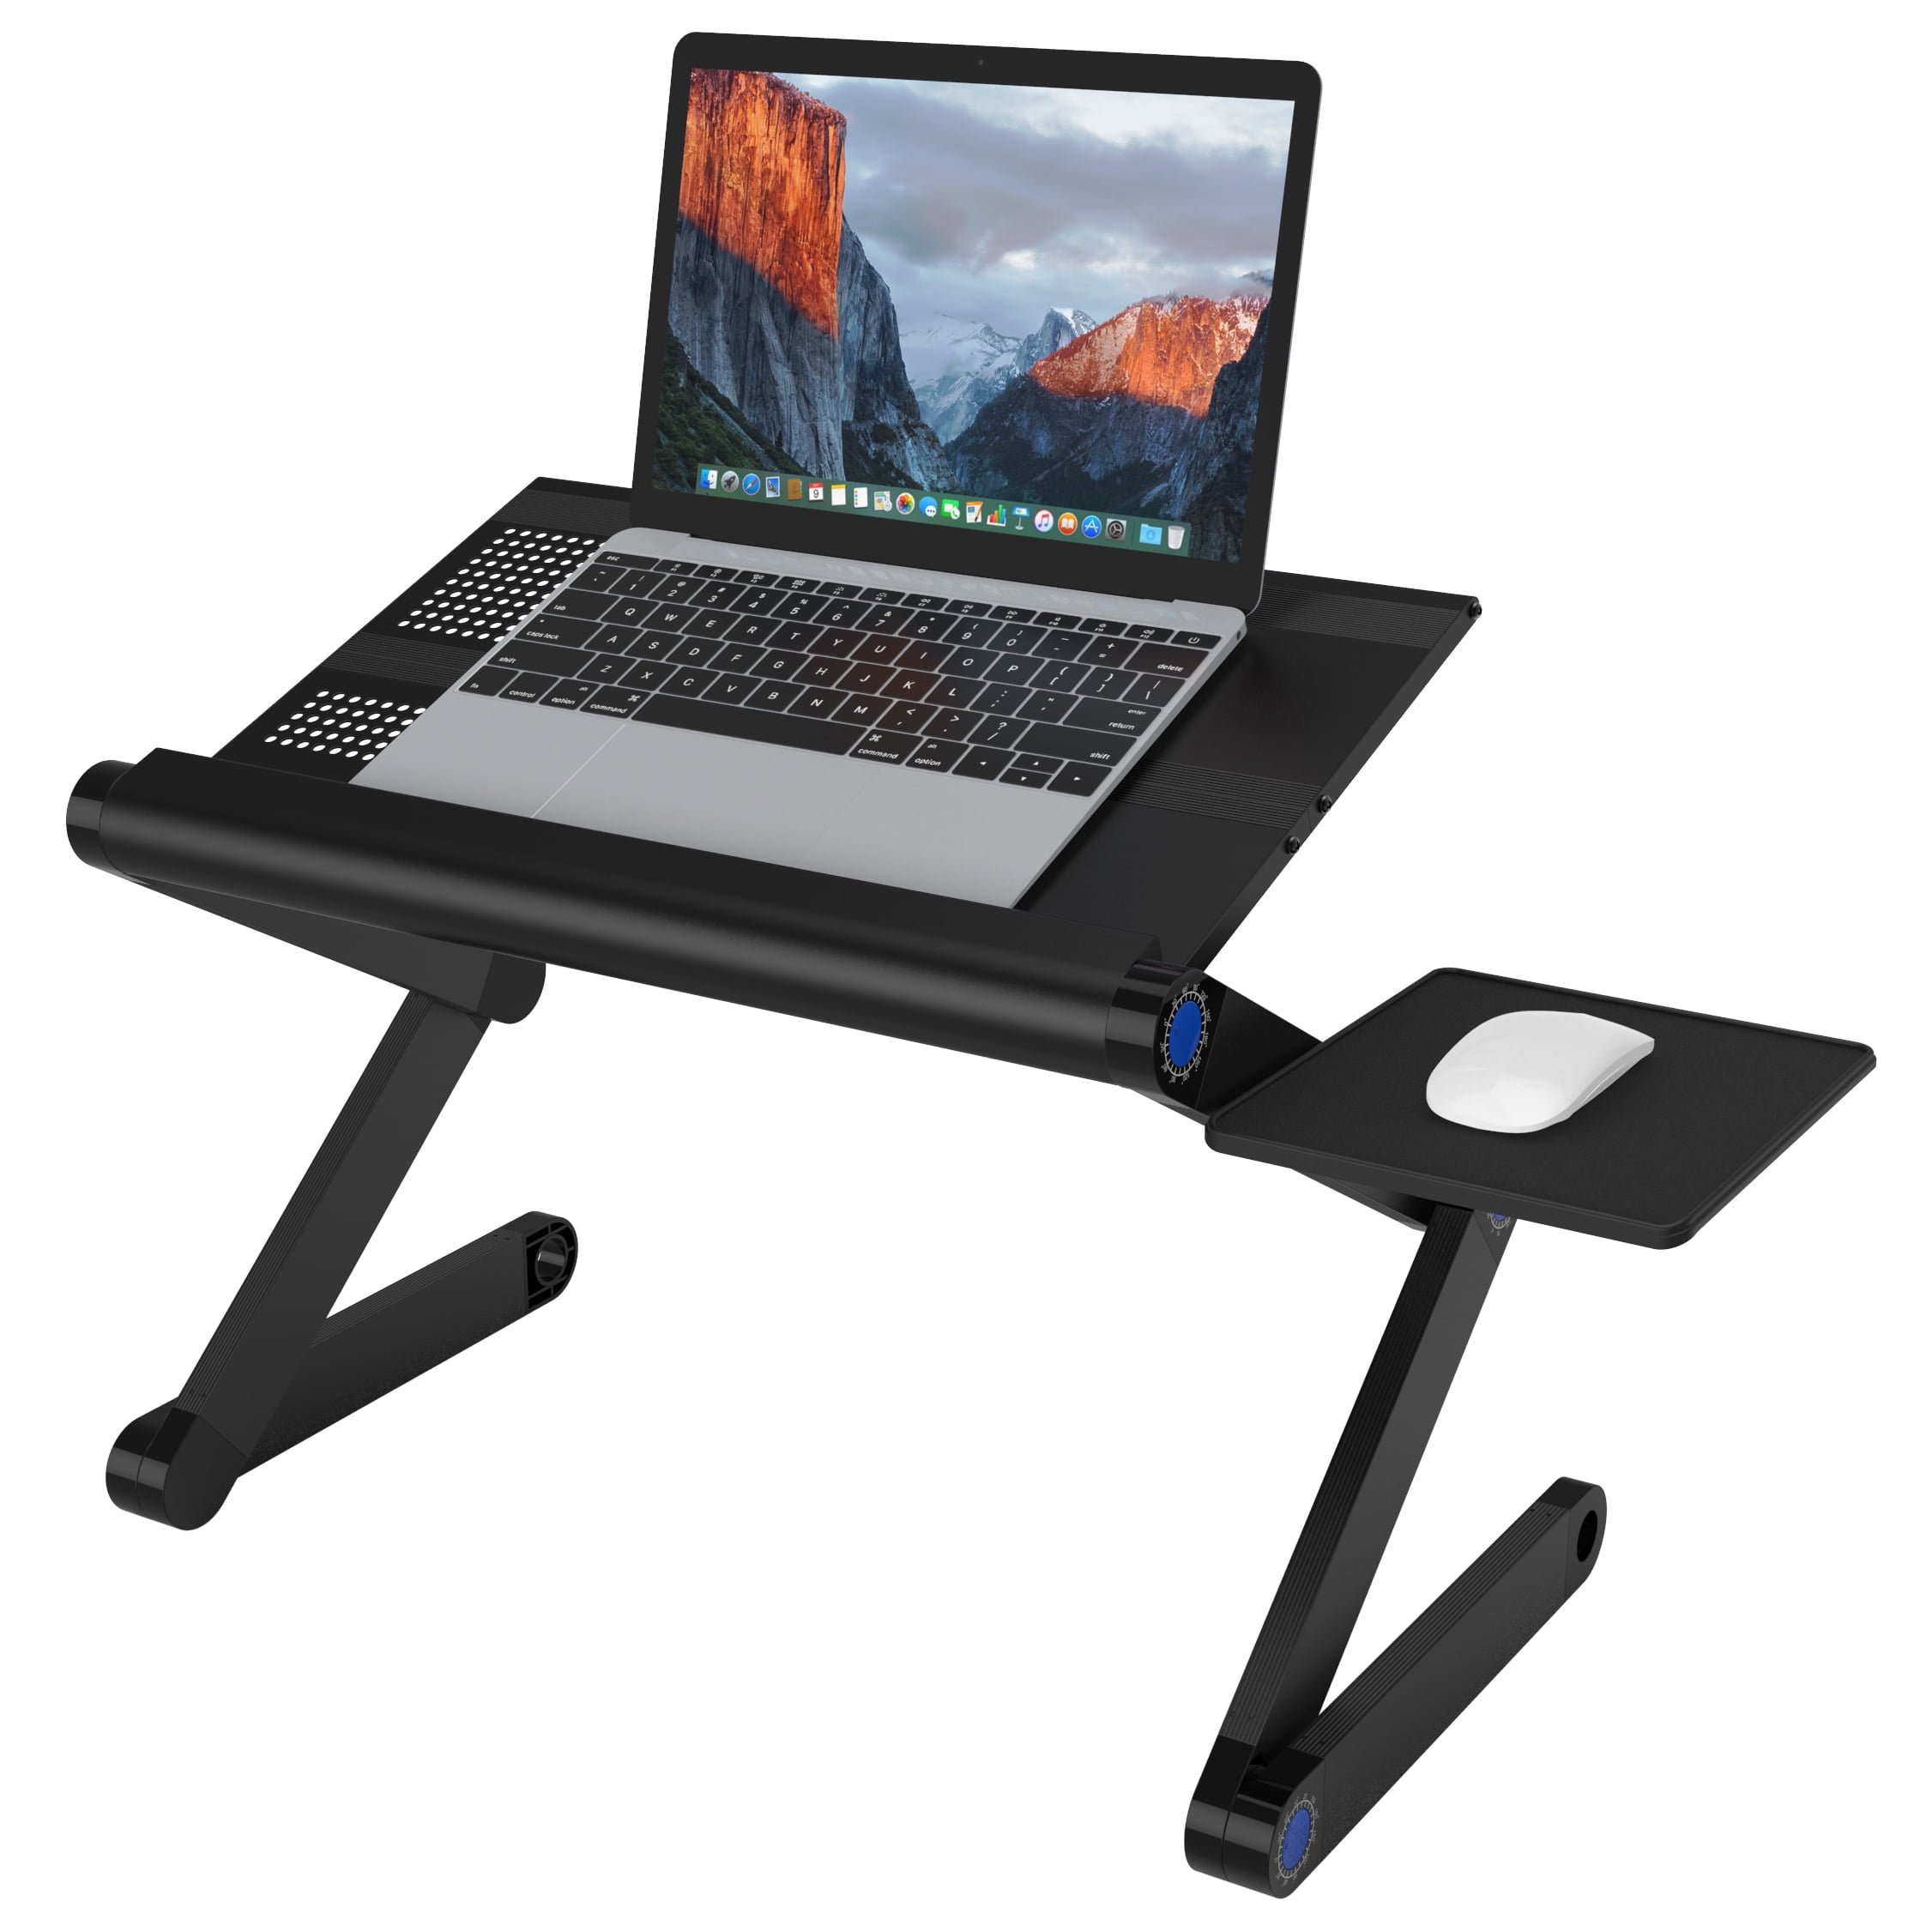 Ergonomic Aluminum Laptop Mount Computer Stand for Desk Silver Miady Laptop Stand Detachable Laptop Riser Metal Holder Compatible with 11 to 17.3 Inches Notebook Computer